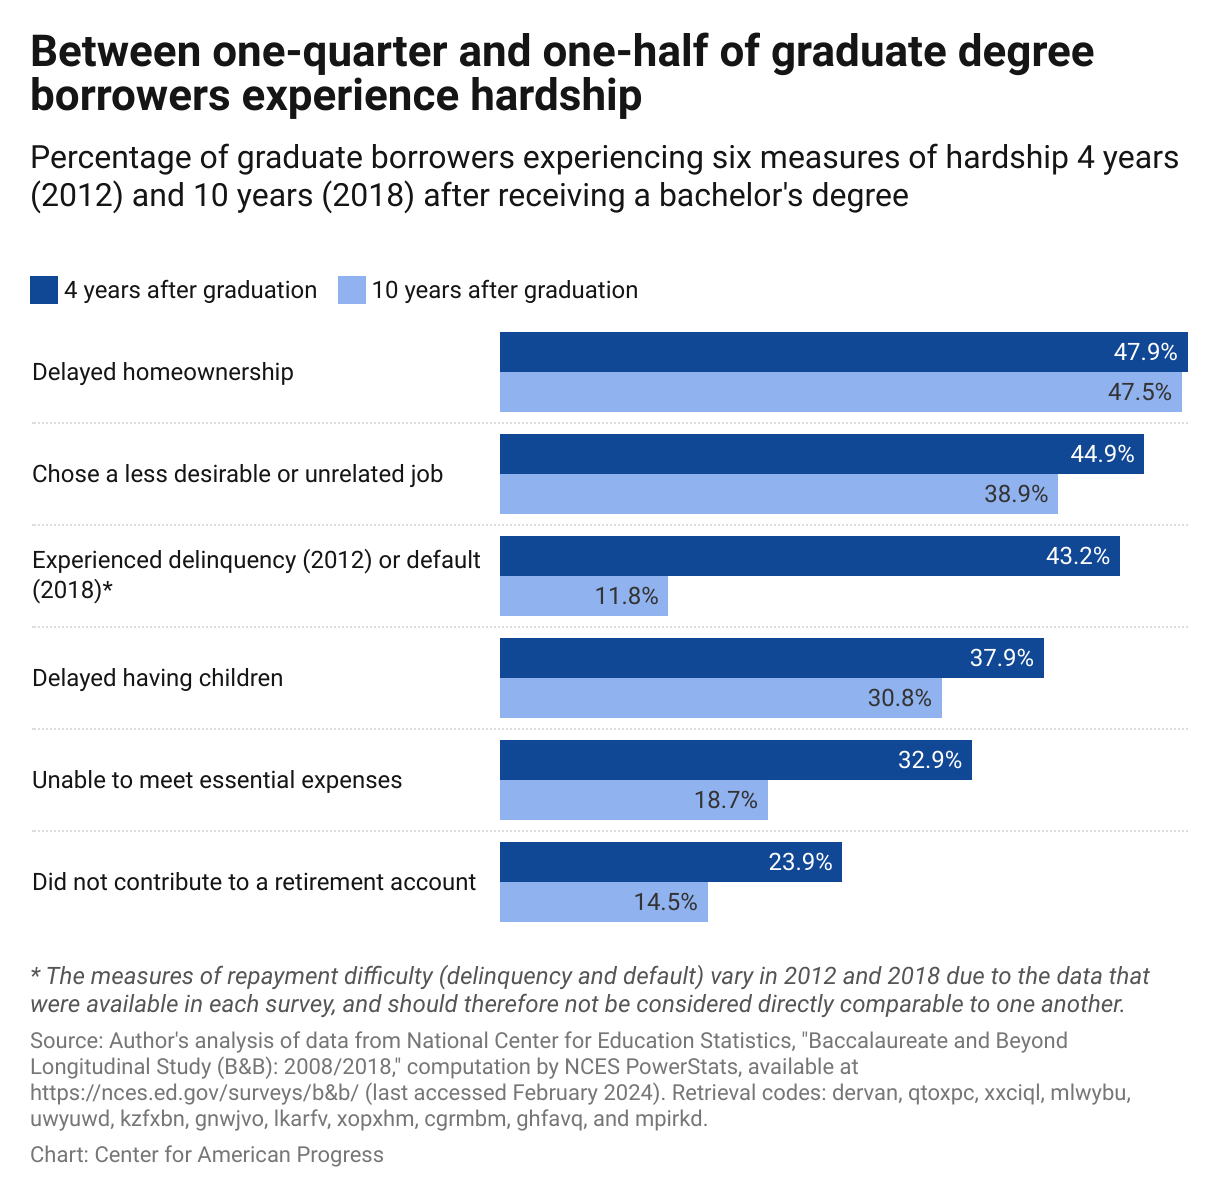 Between about 12 percent and 48 percent of graduate borrowers experience at least one type of hardship following graduation; for example, about 33 percent of graduate borrowers were unable to meet essential expenses four years after graduation, while nearly 19 percent of borrowers were unable to do so 10 years after graduation.